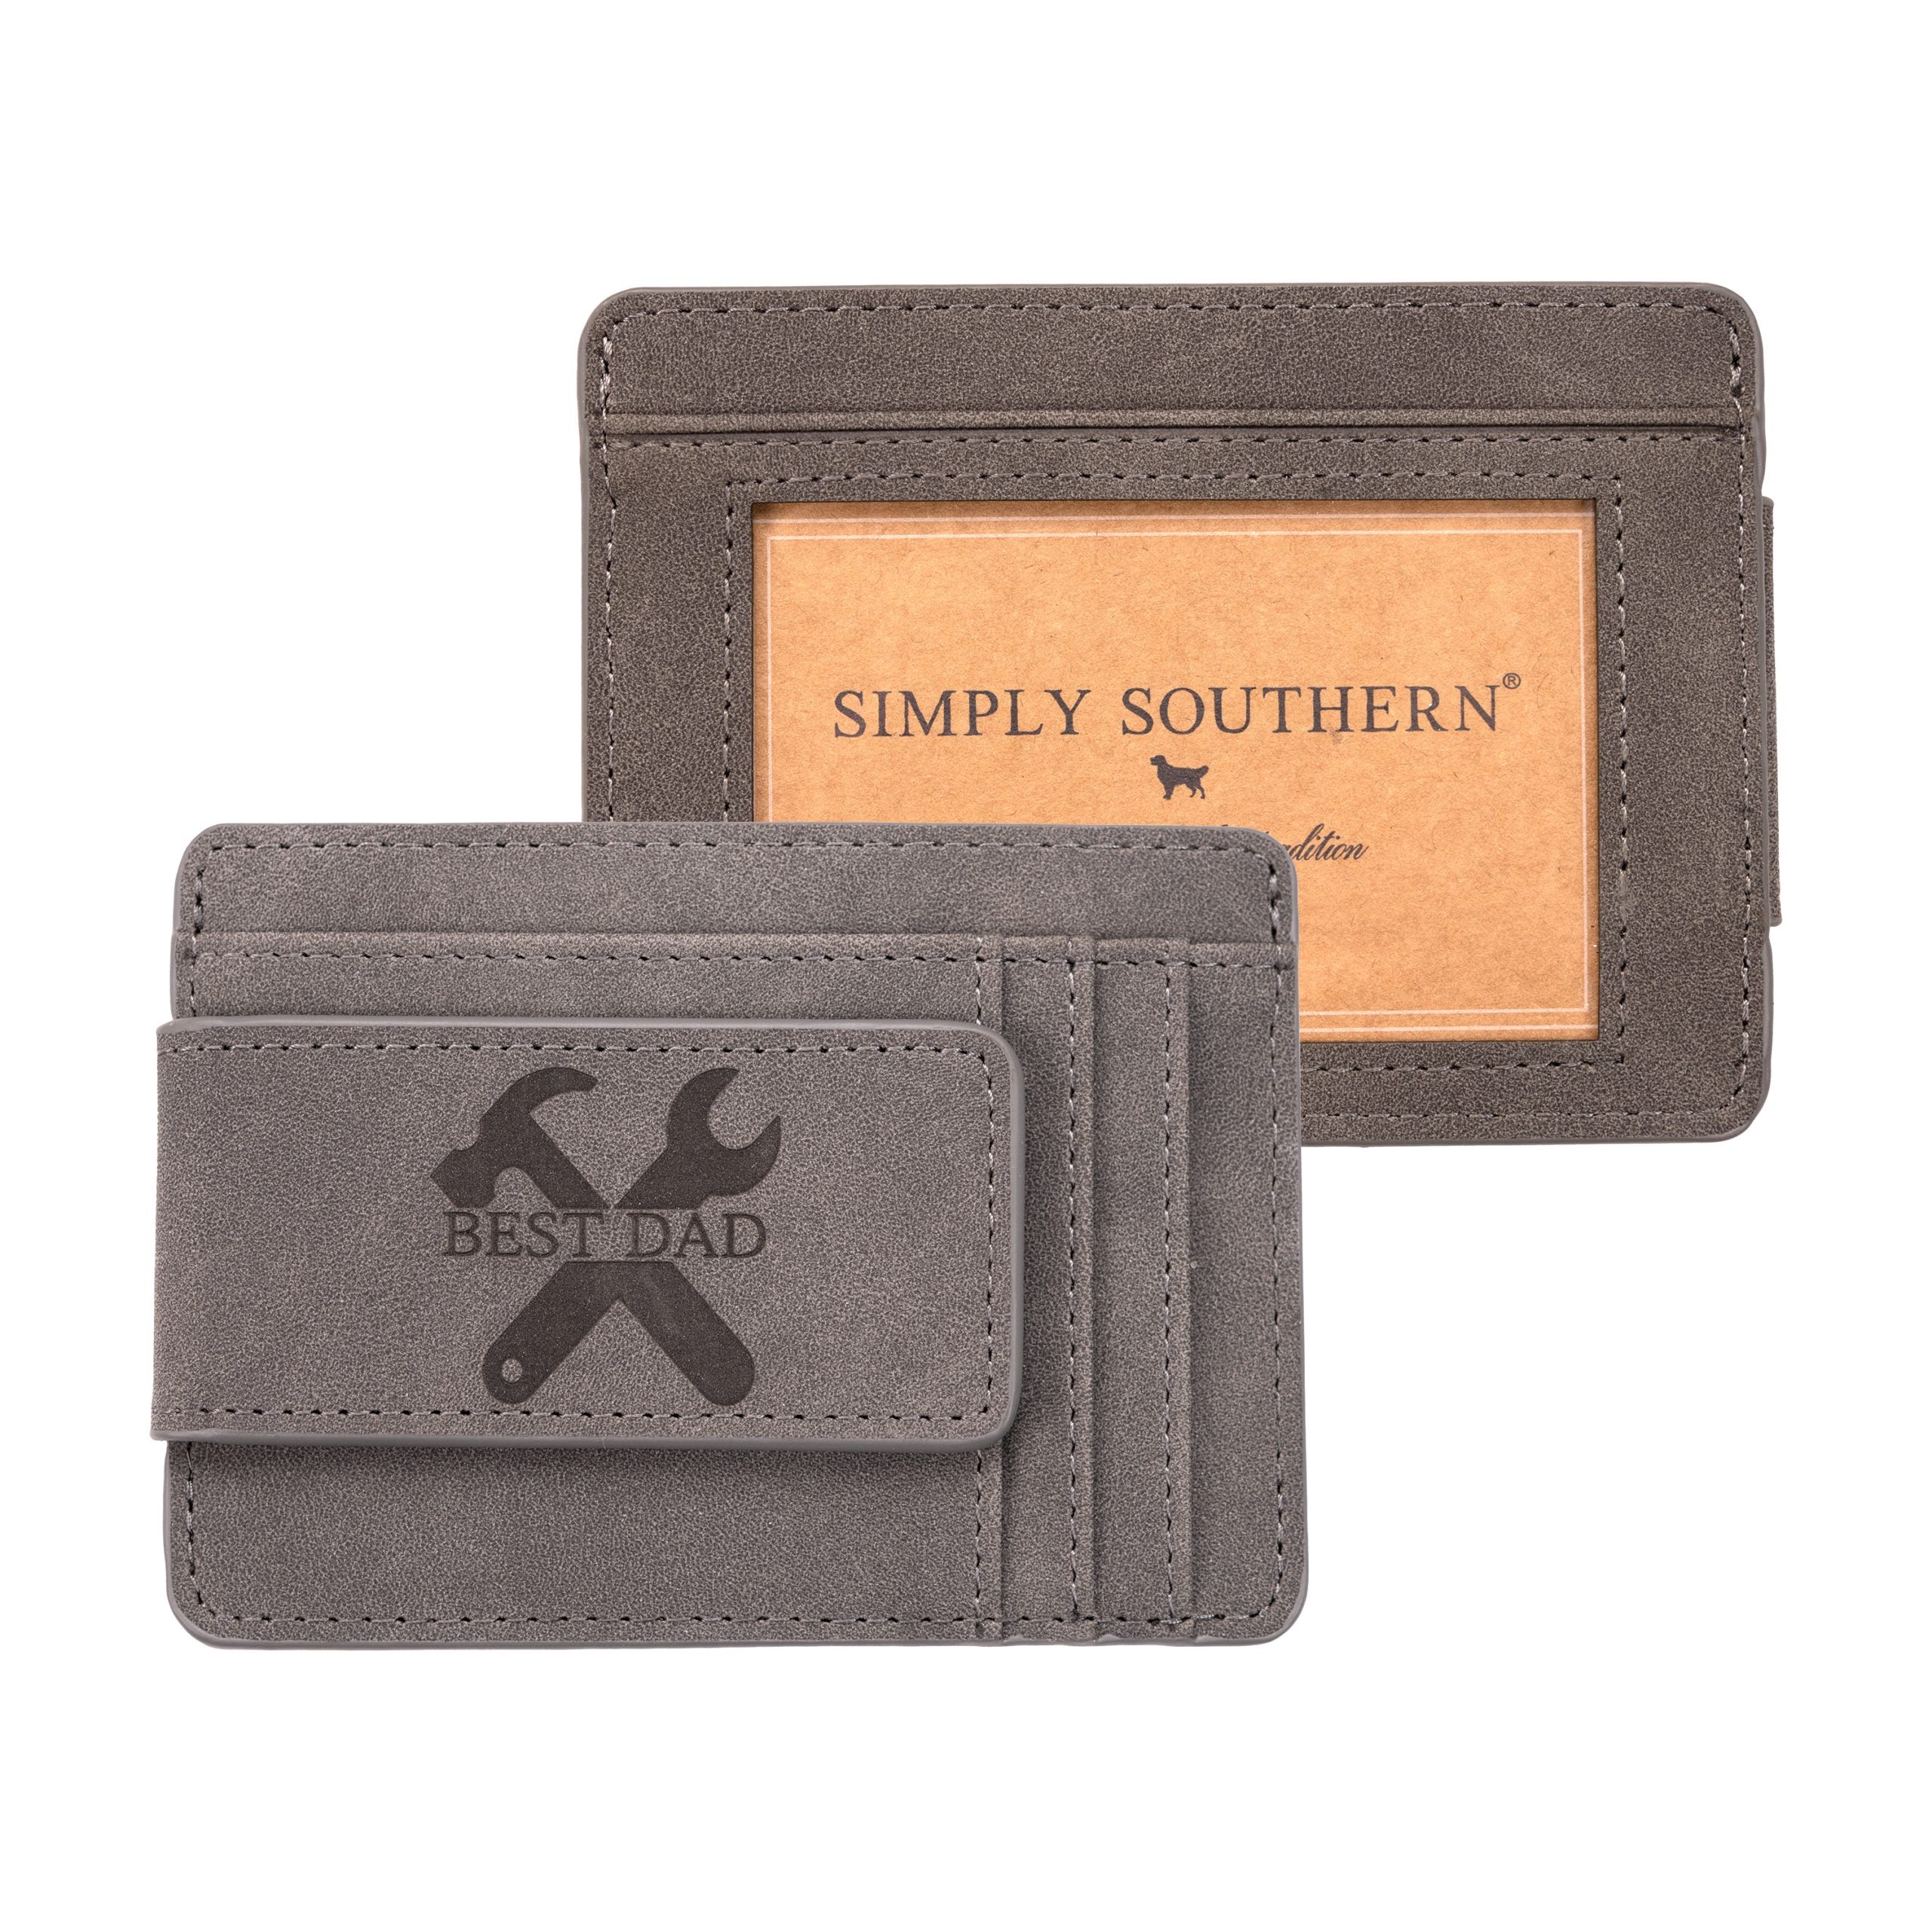 Simply Southern Clip Wallet